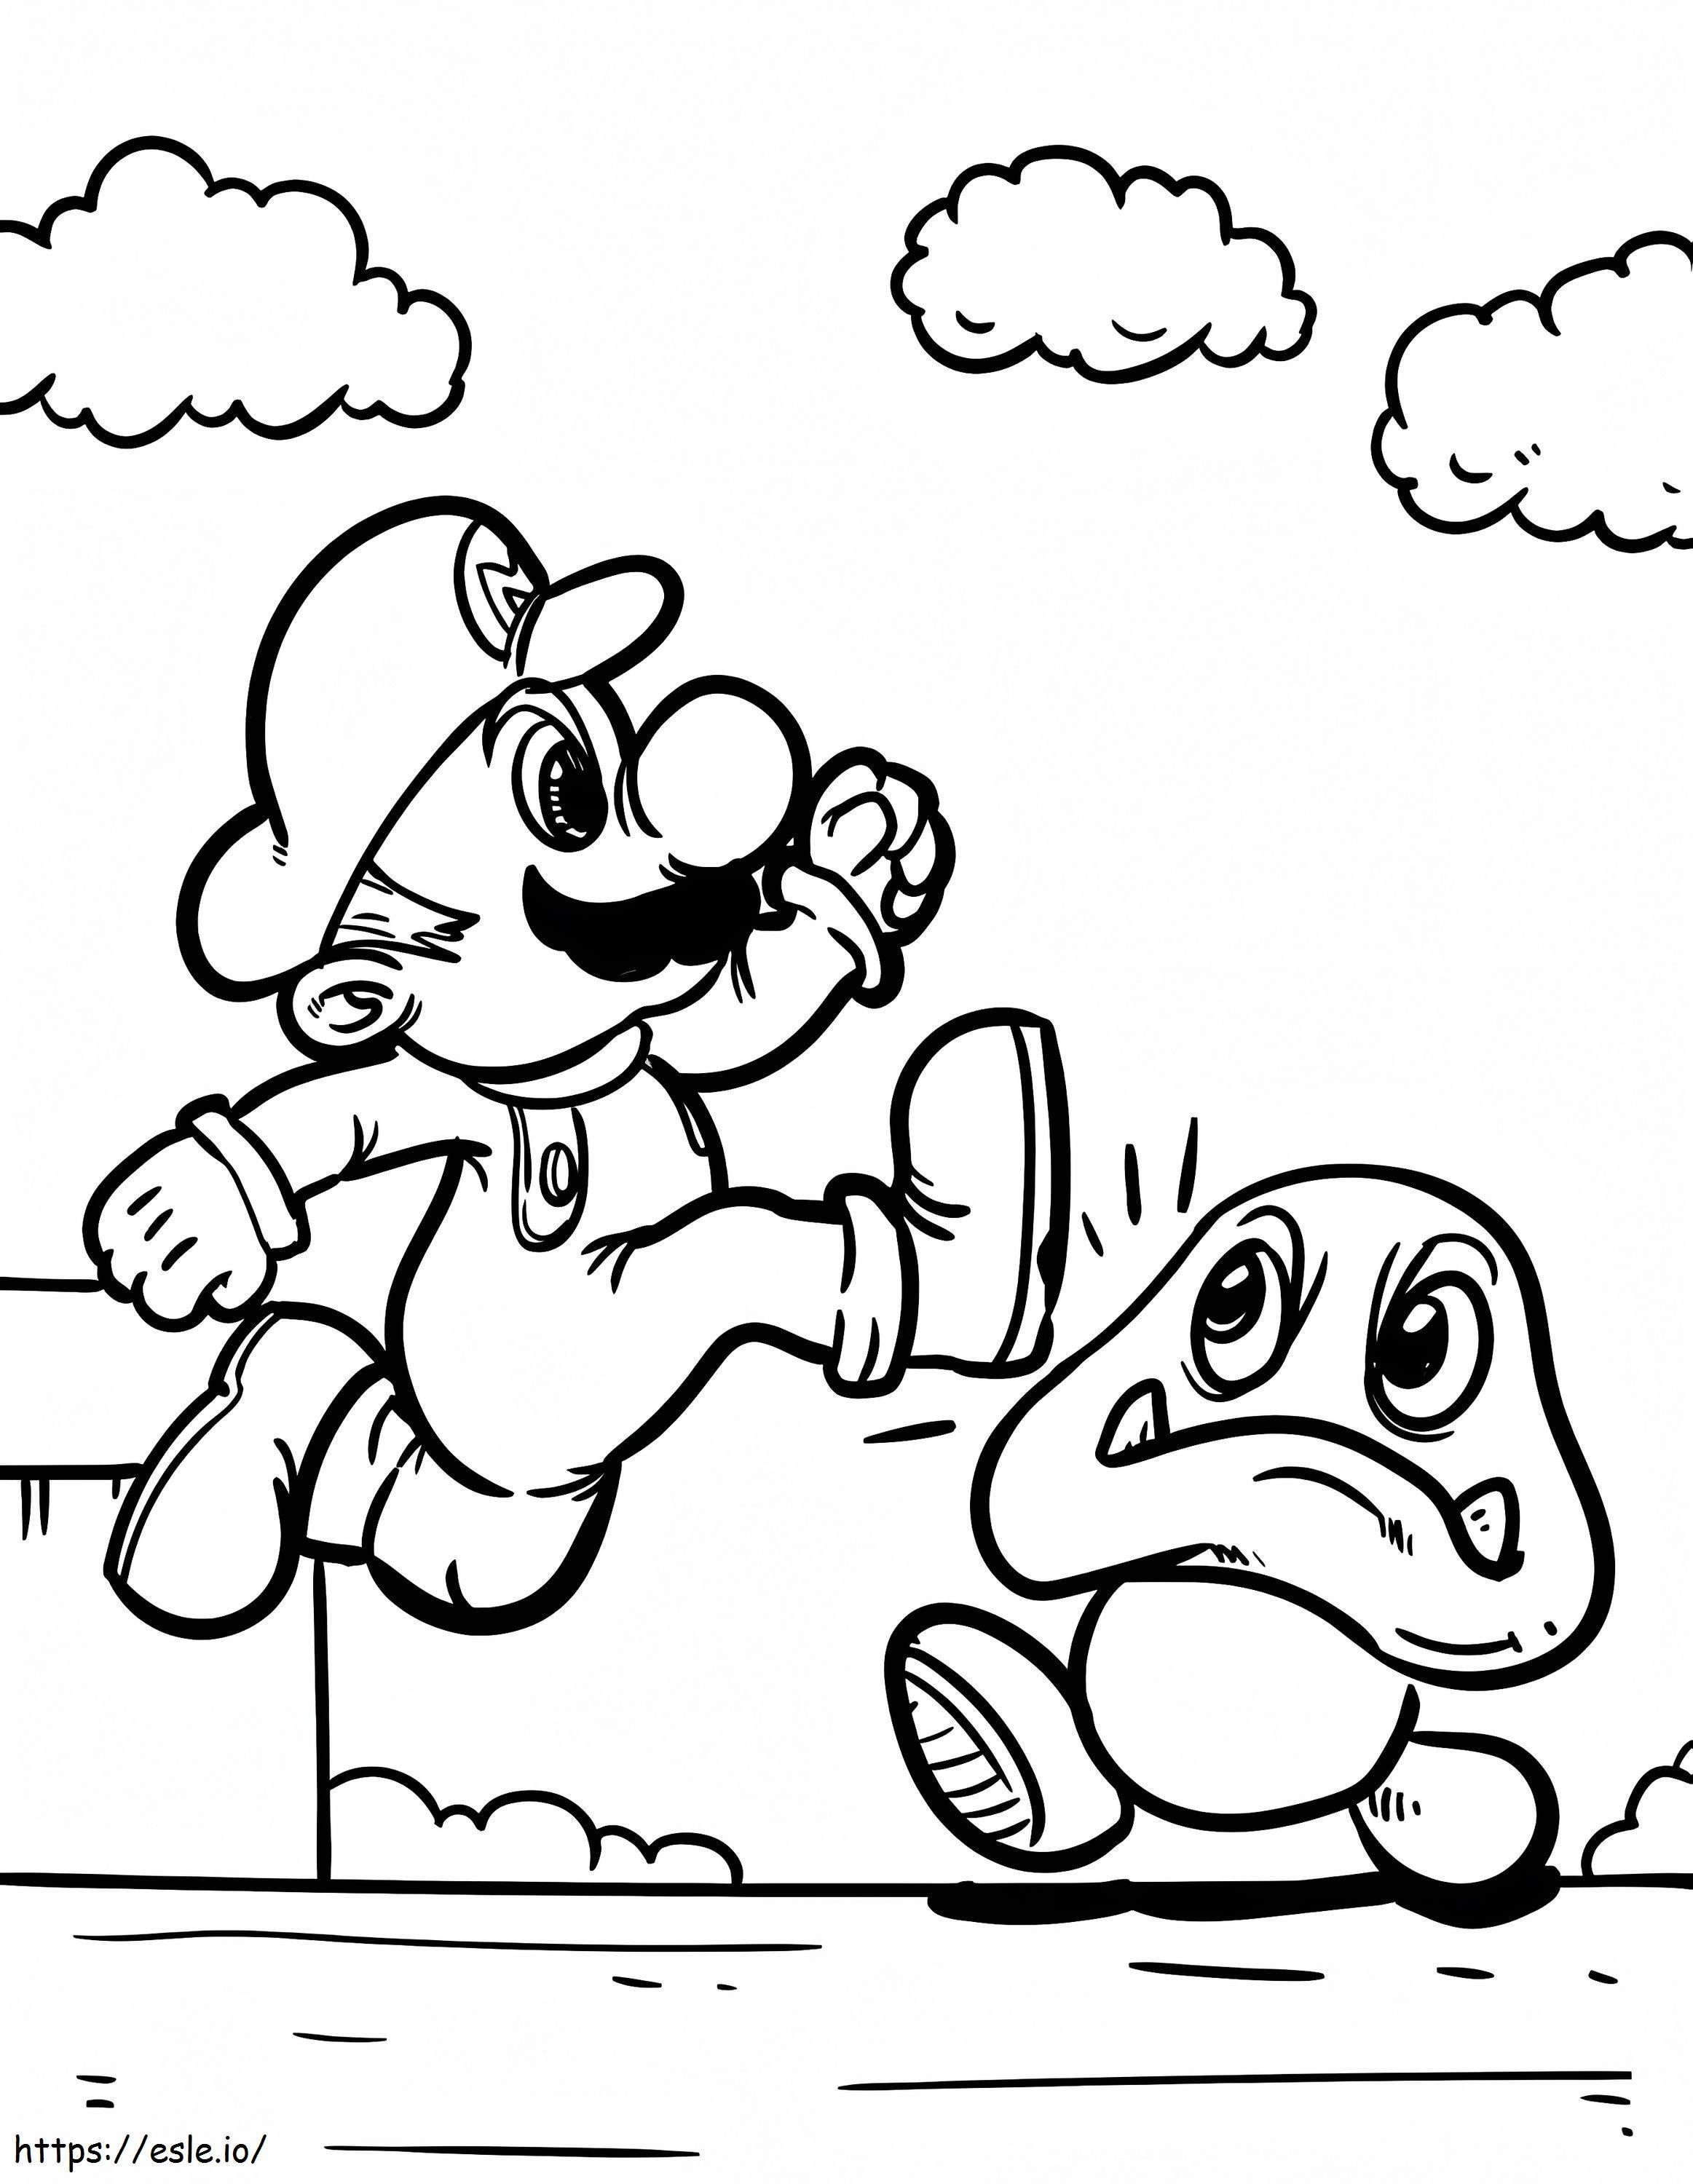 Super Mario In Game coloring page